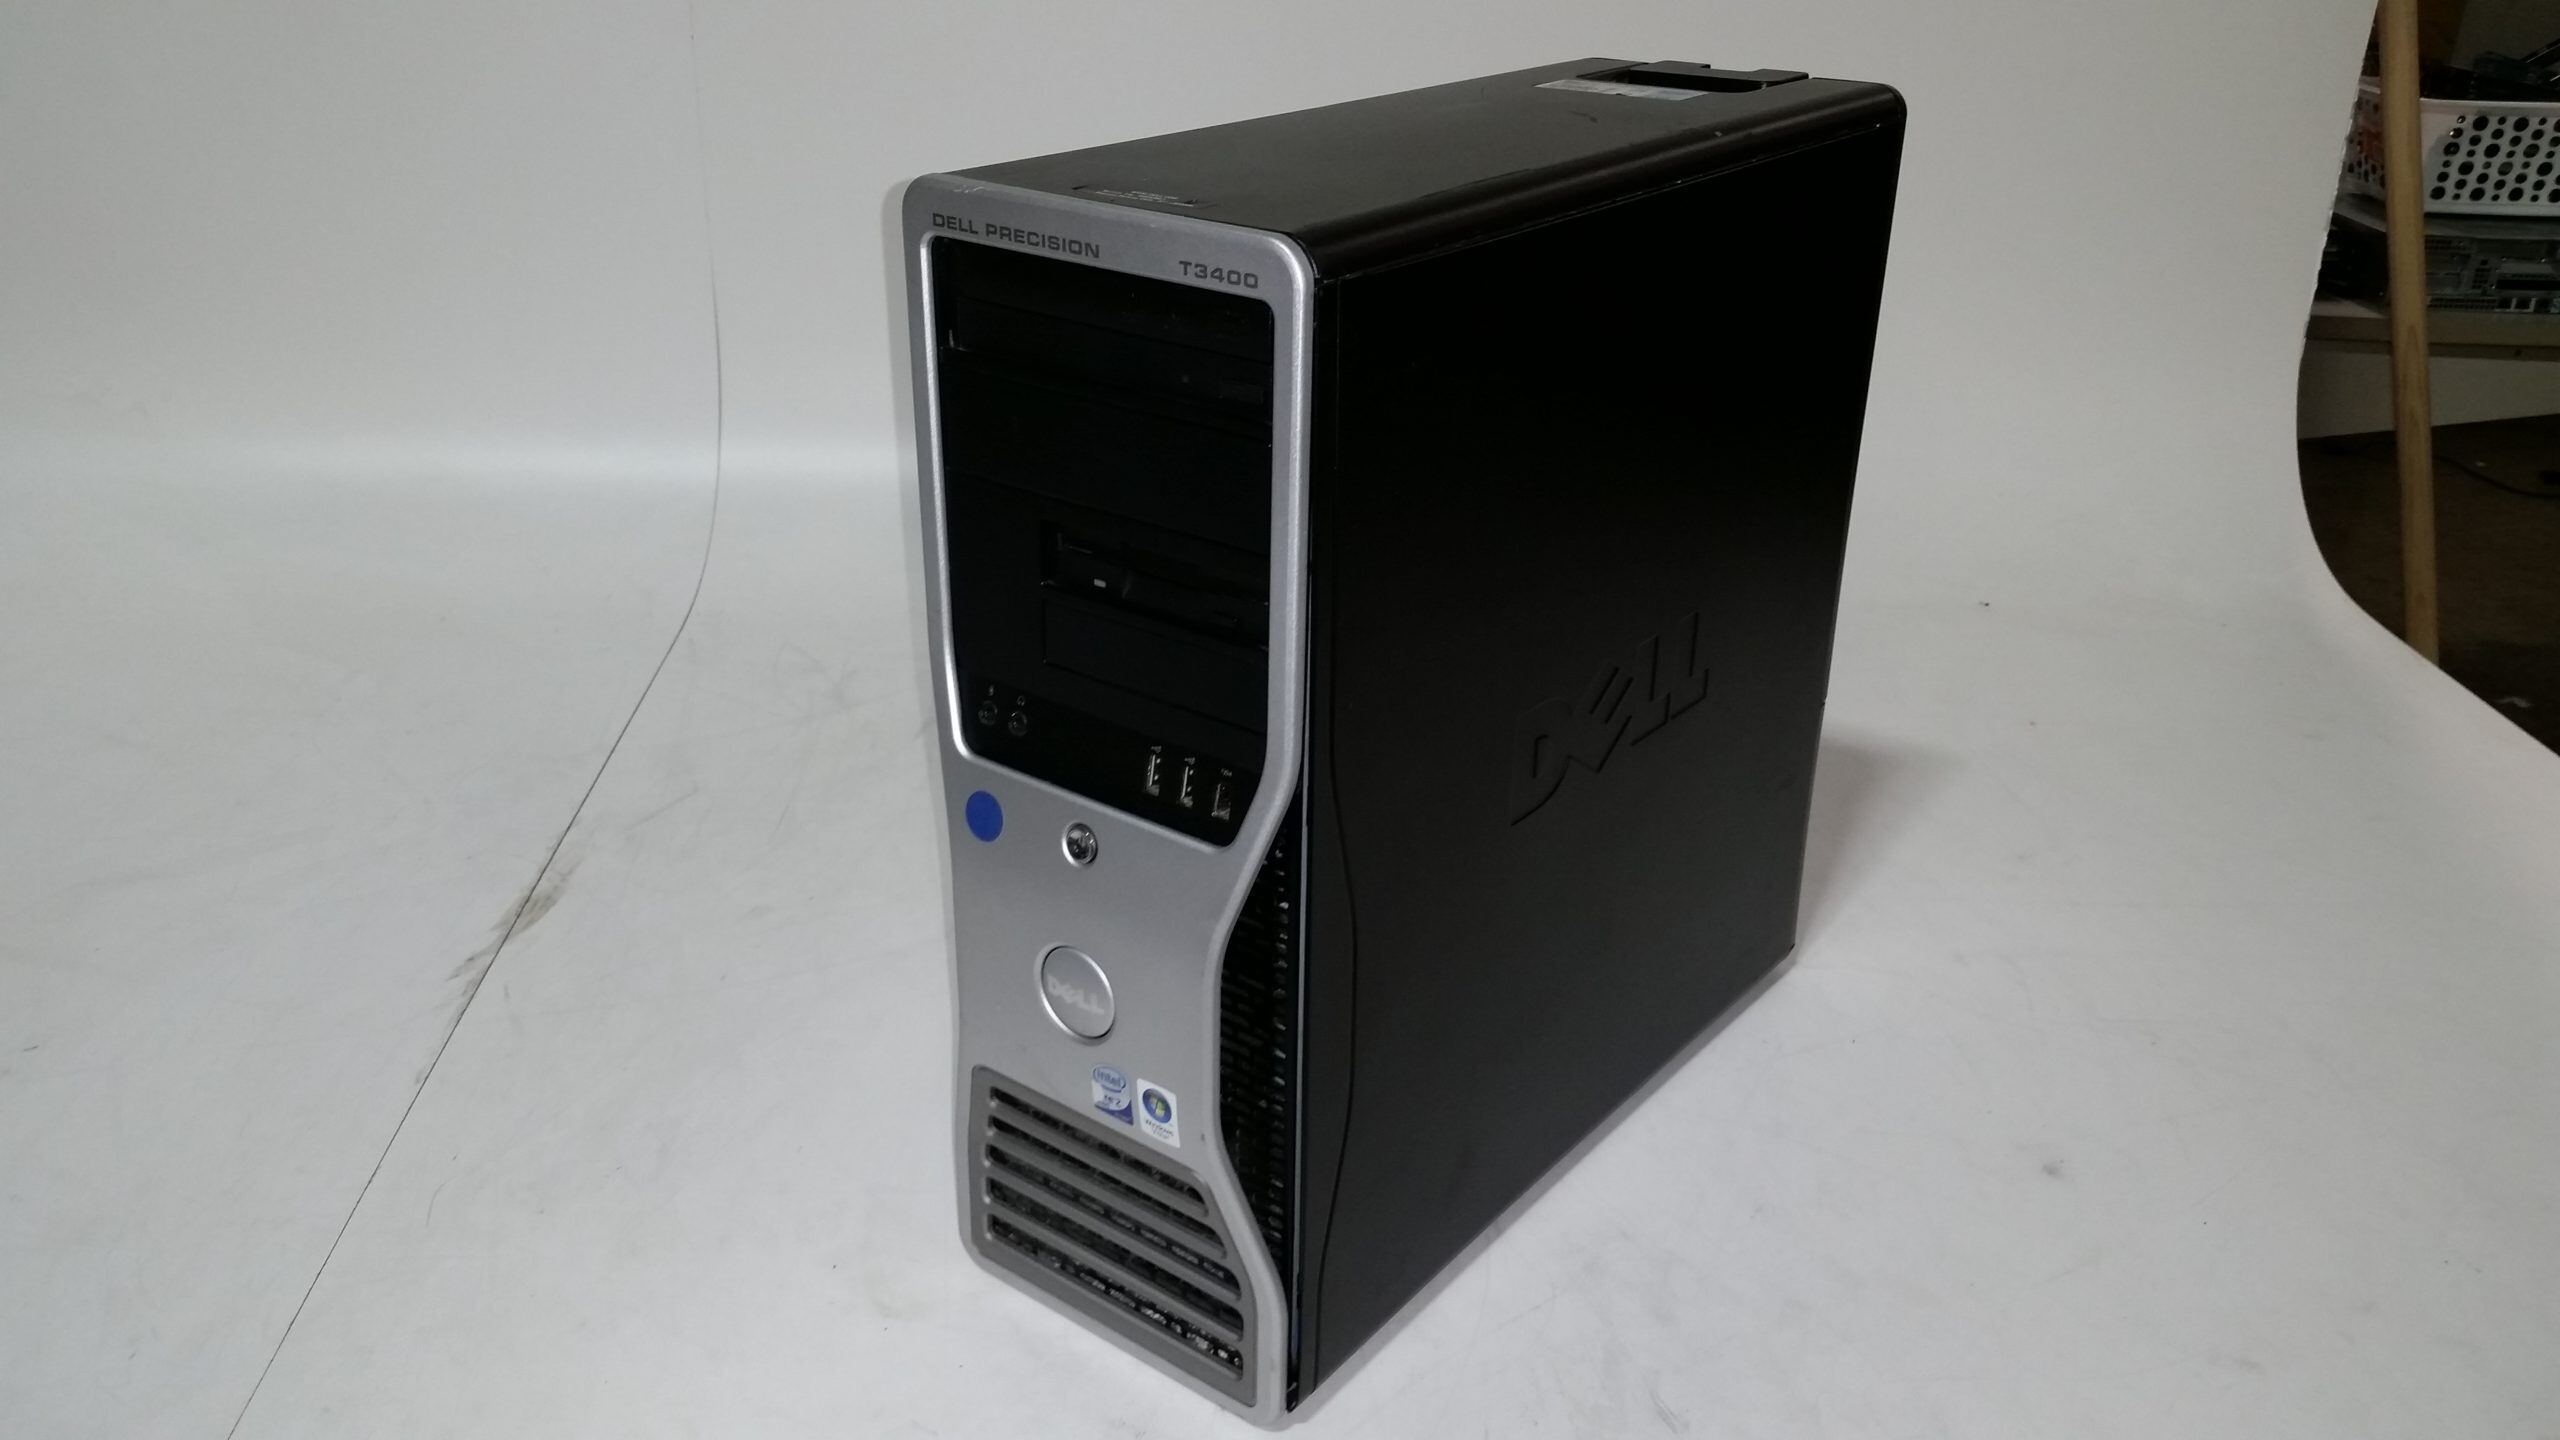 What Is Ram Speed Of Dell T3400 Workstation